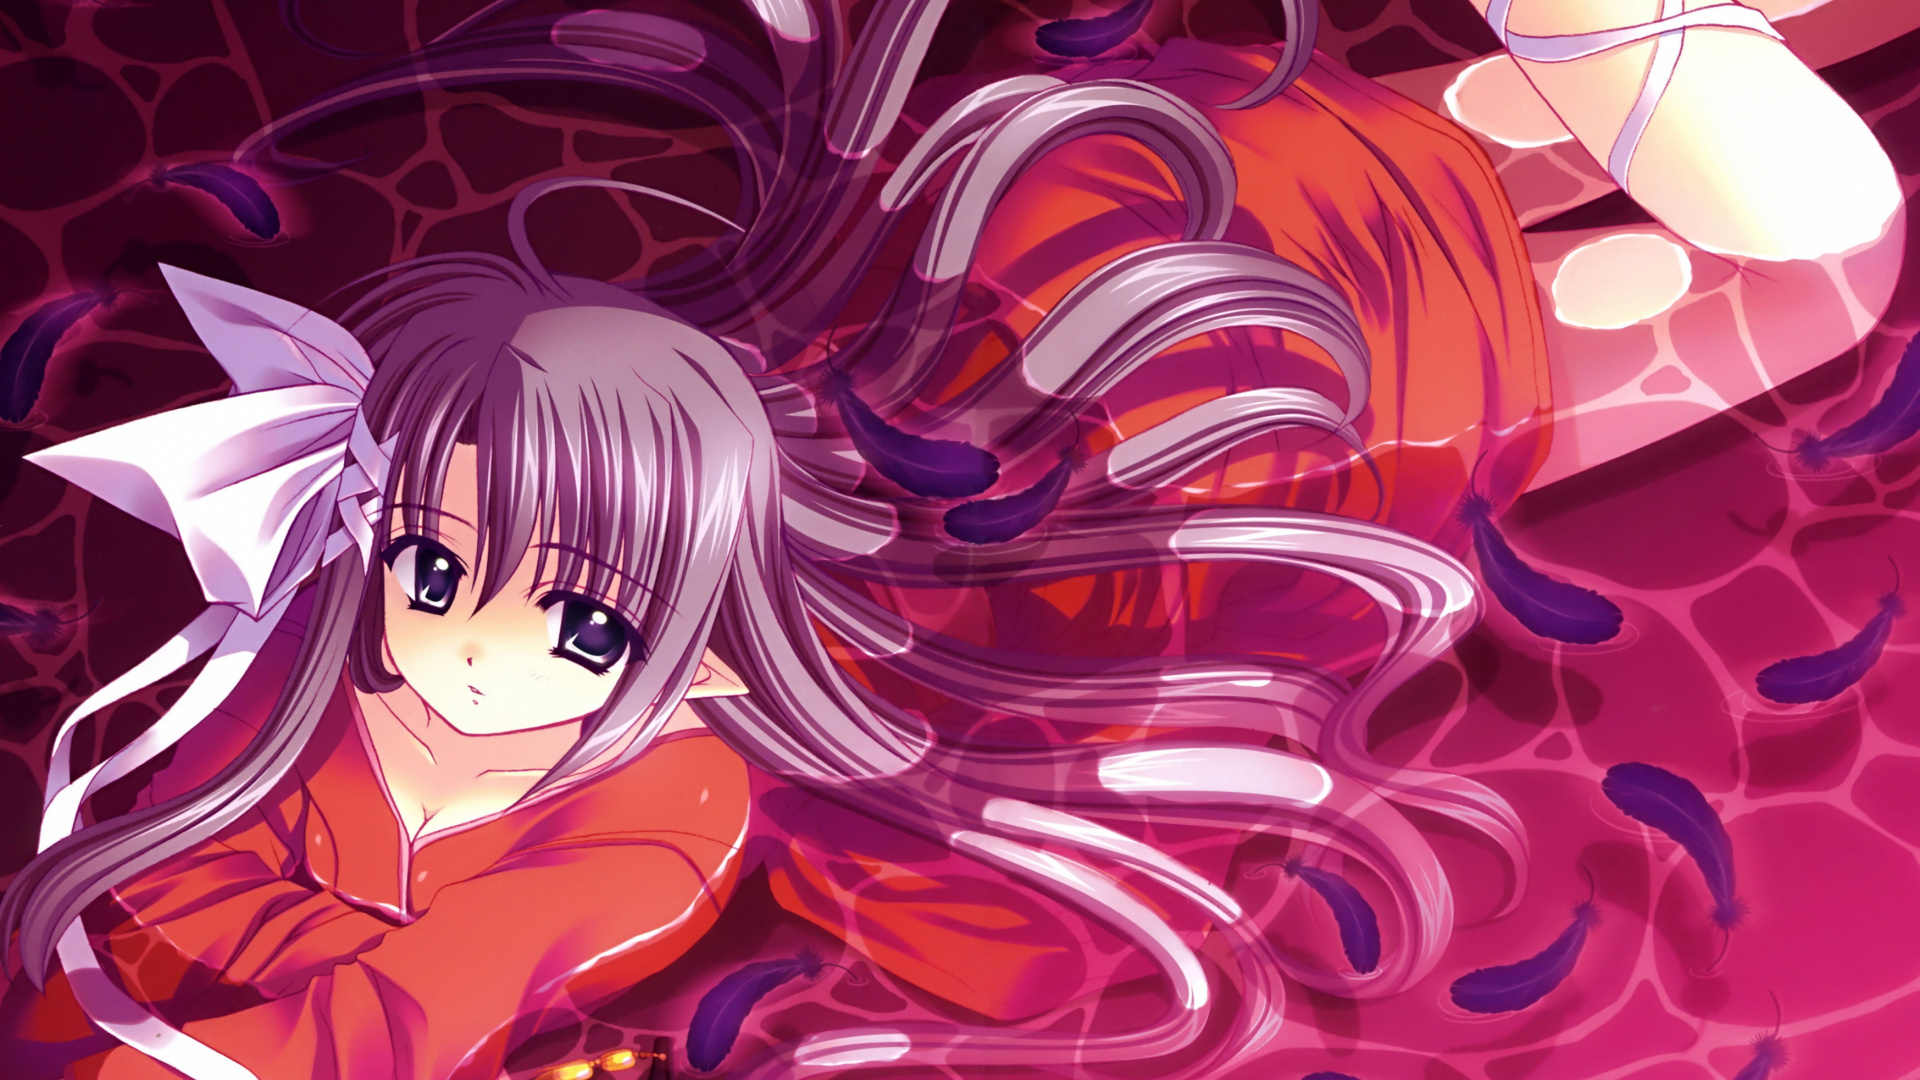 Personnage D'anime Fille Aux Cheveux Rouges. Wallpaper in 1920x1080 Resolution